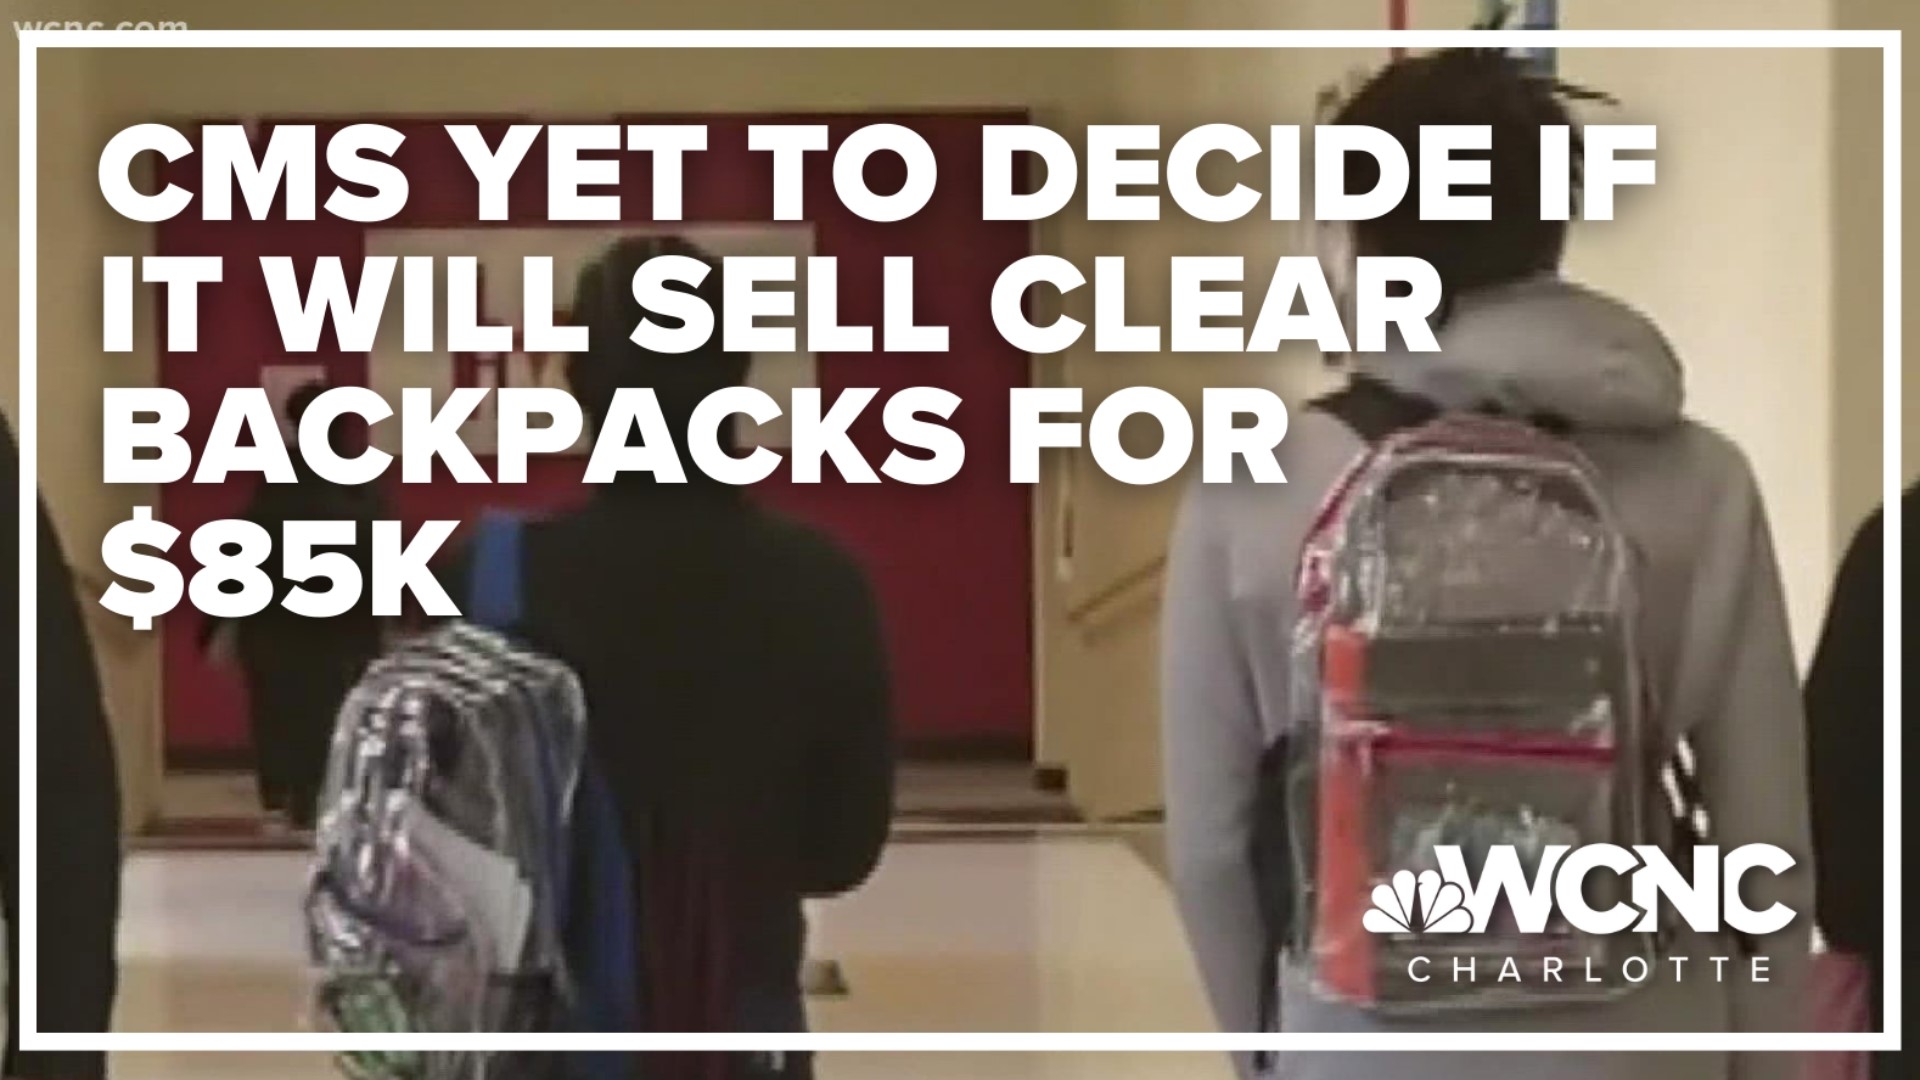 The district put the clear backpacks up for auction after learning about a Proposition 65 cancer warning.